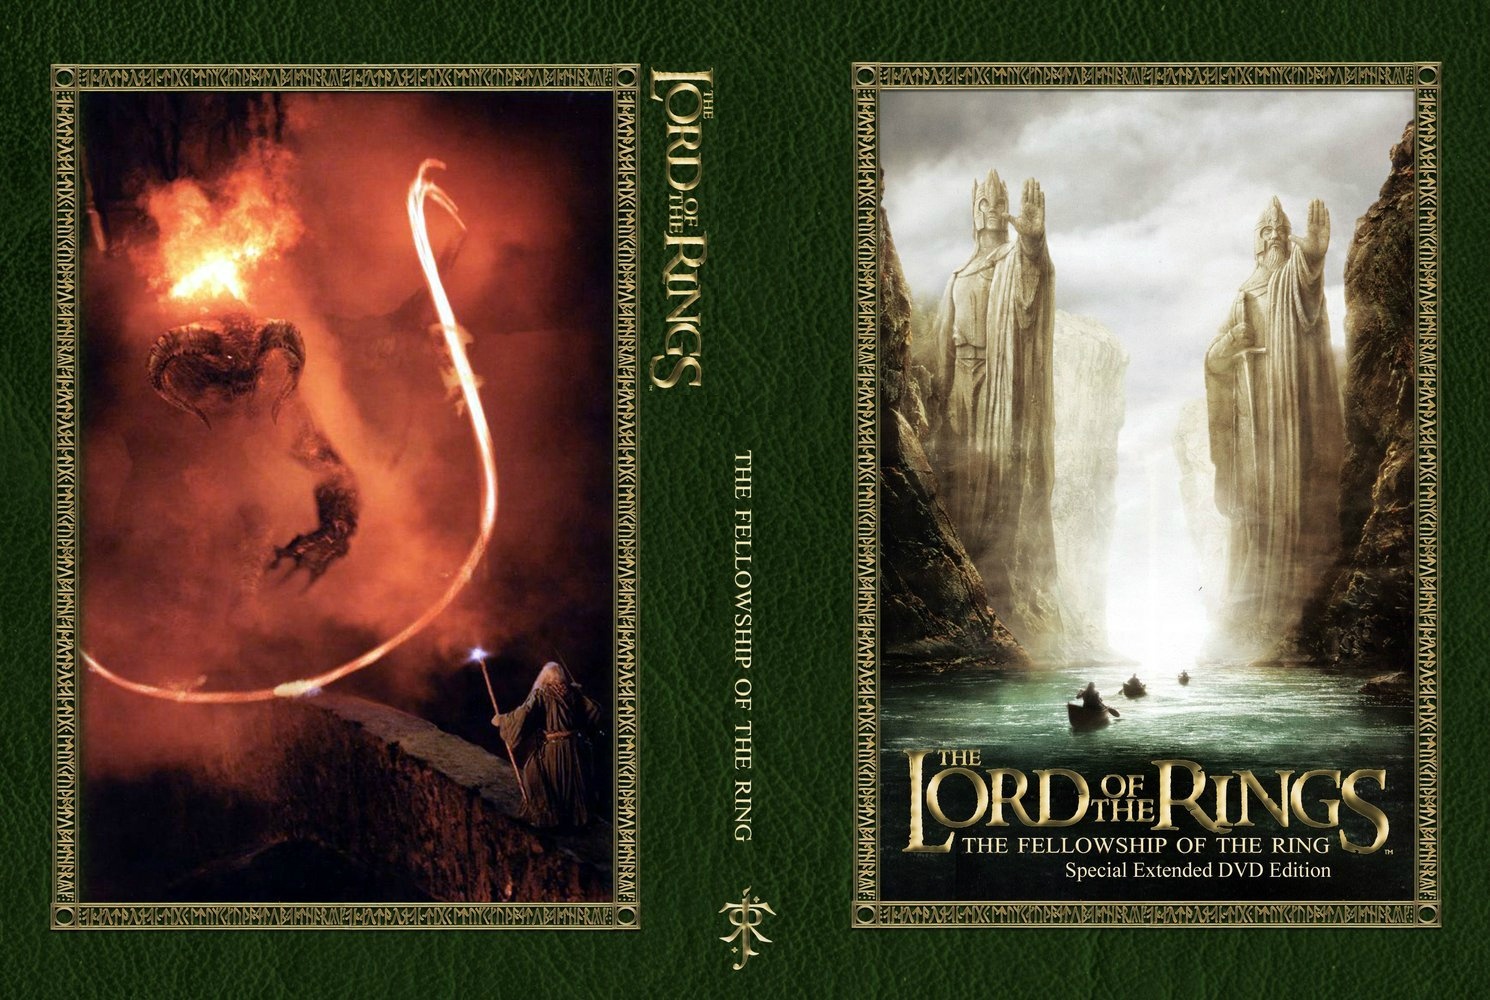 The Lord of the Rings: The Fellowship of the Ring box cover